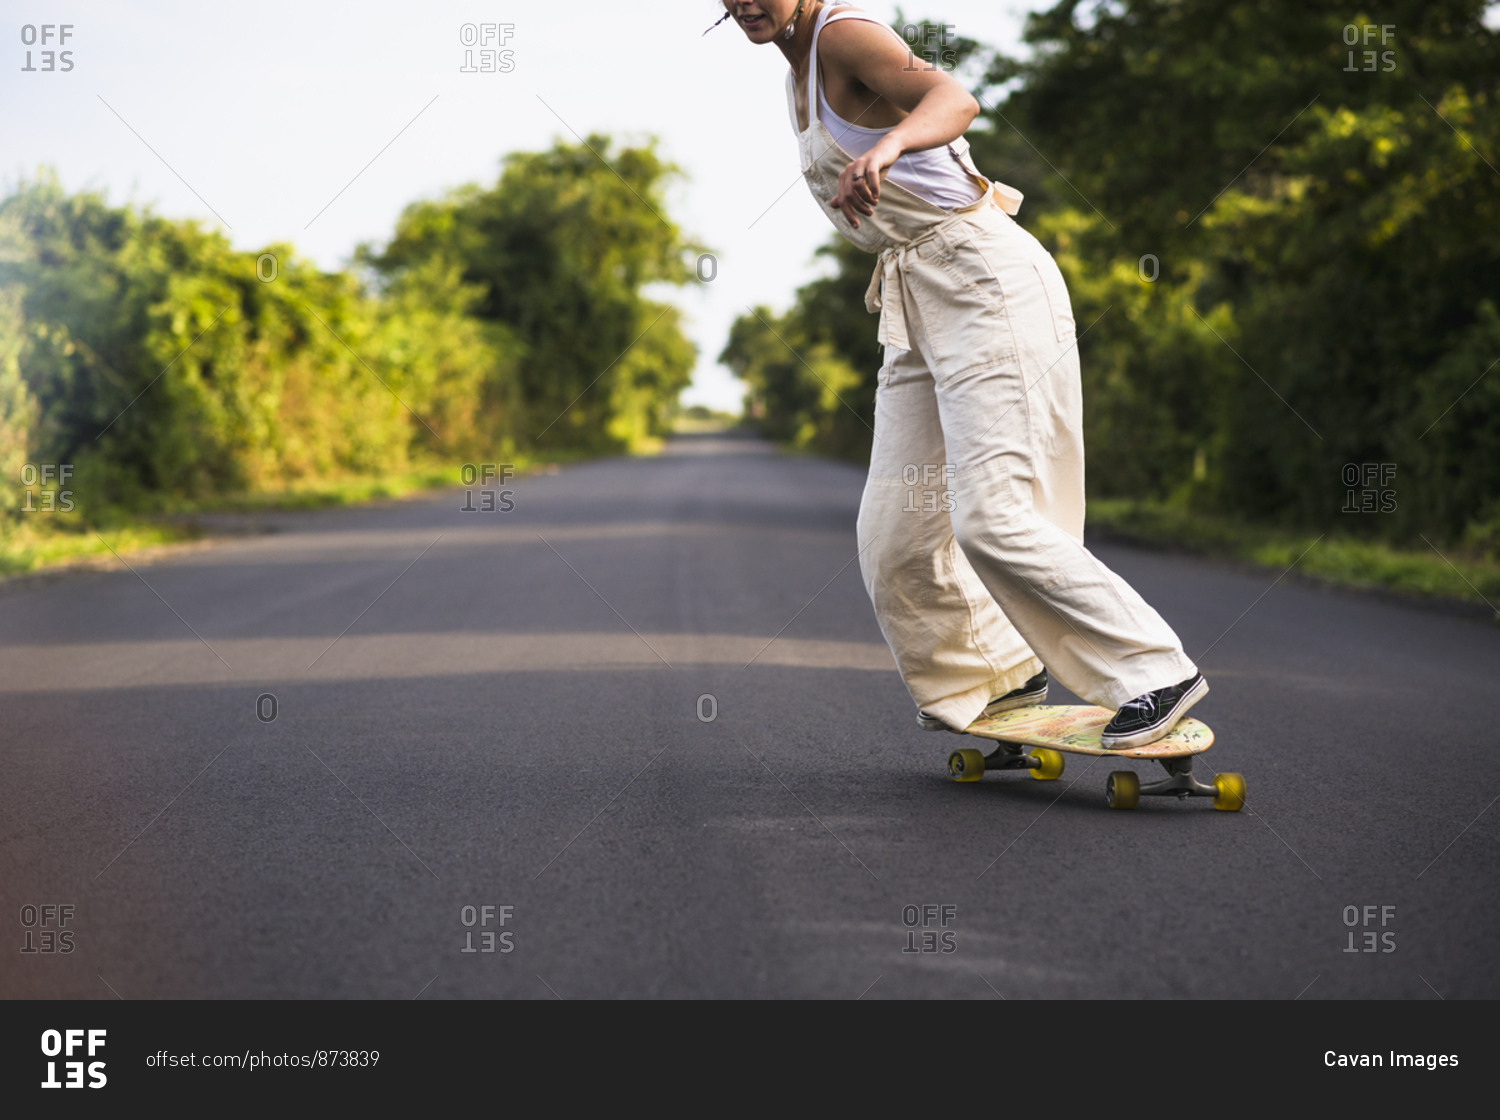 excitation balanced microscopic Young Woman Skateboarding in Summer stock photo - OFFSET